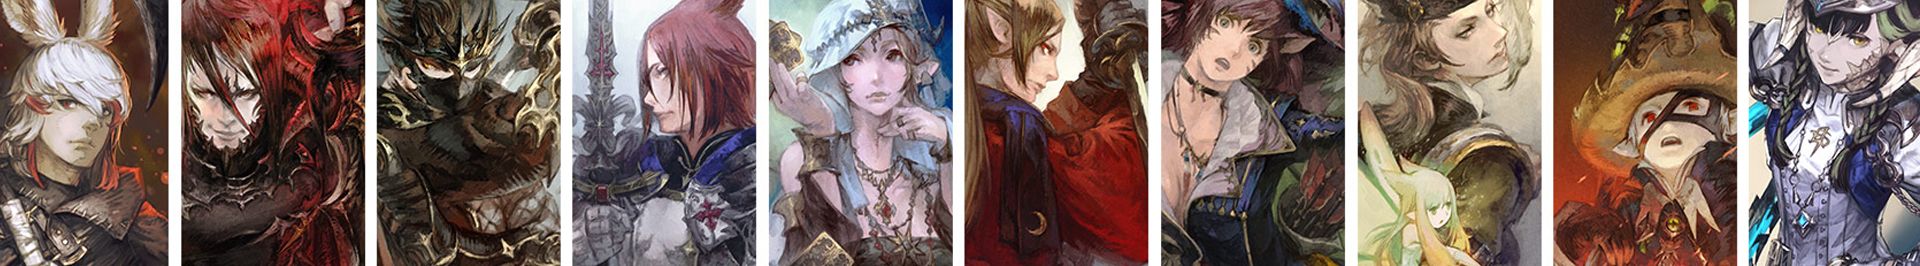 Final Fantasy 14 job collage of different classes and characters